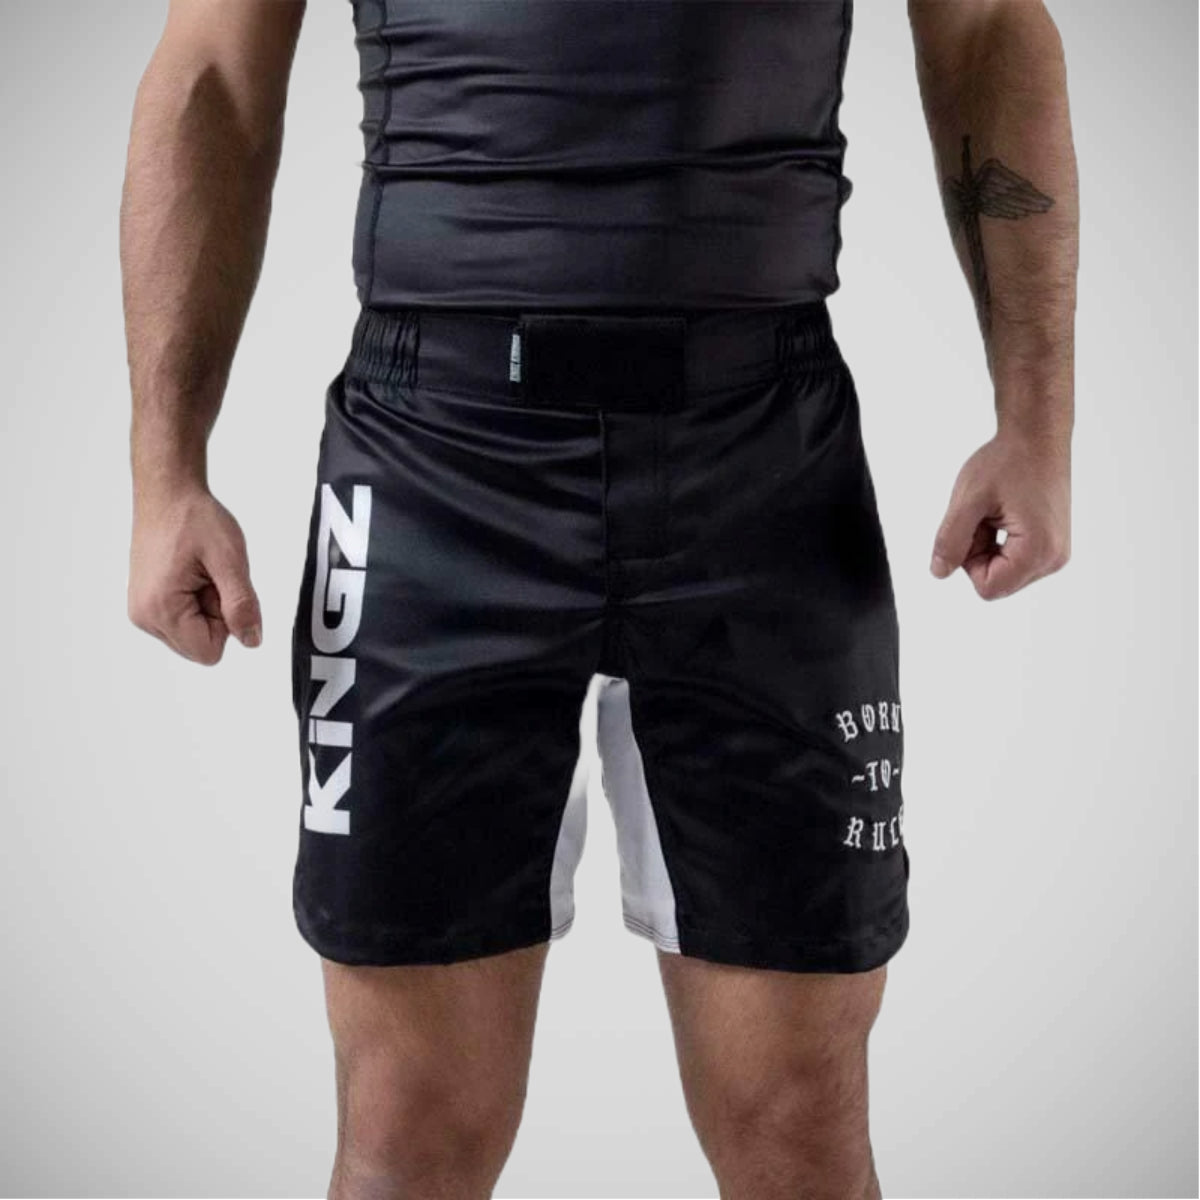 Black Kingz Born To Rule Grappling Shorts from Made4Fighters